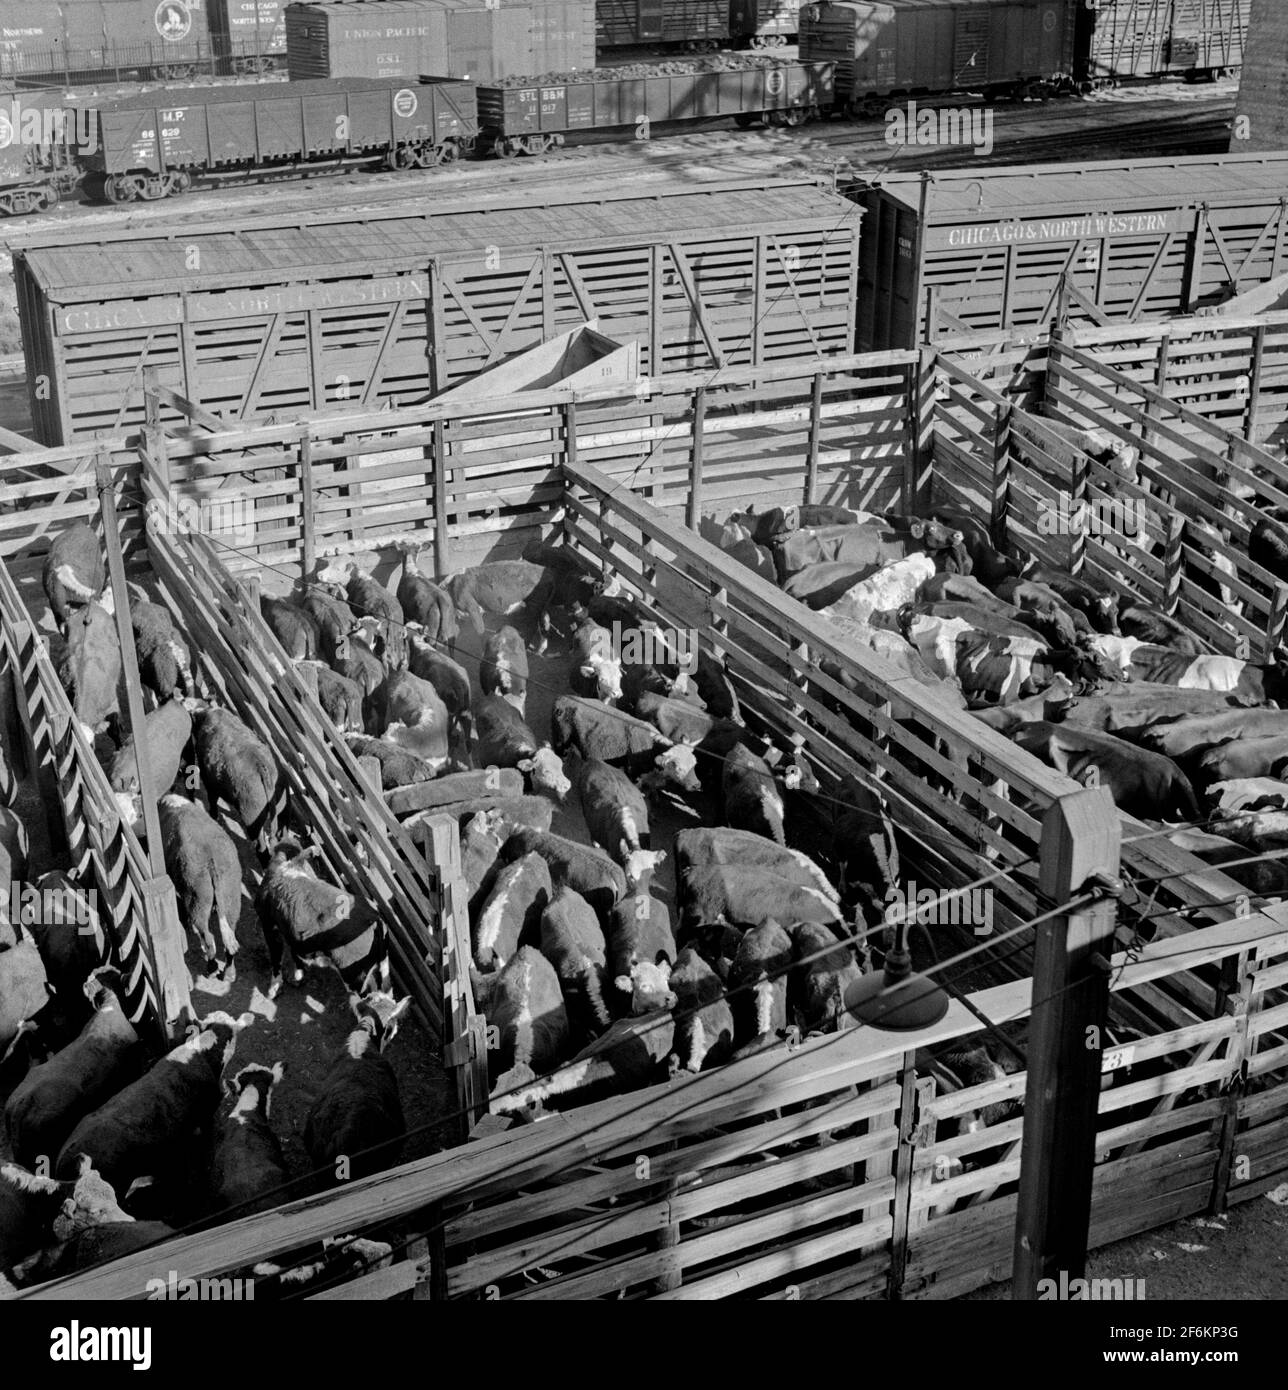 Cattle in loading pens ready to be shipped to freight cars after auction sale. Union Stockyards, Omaha, Nebraska. 1941. Stock Photo